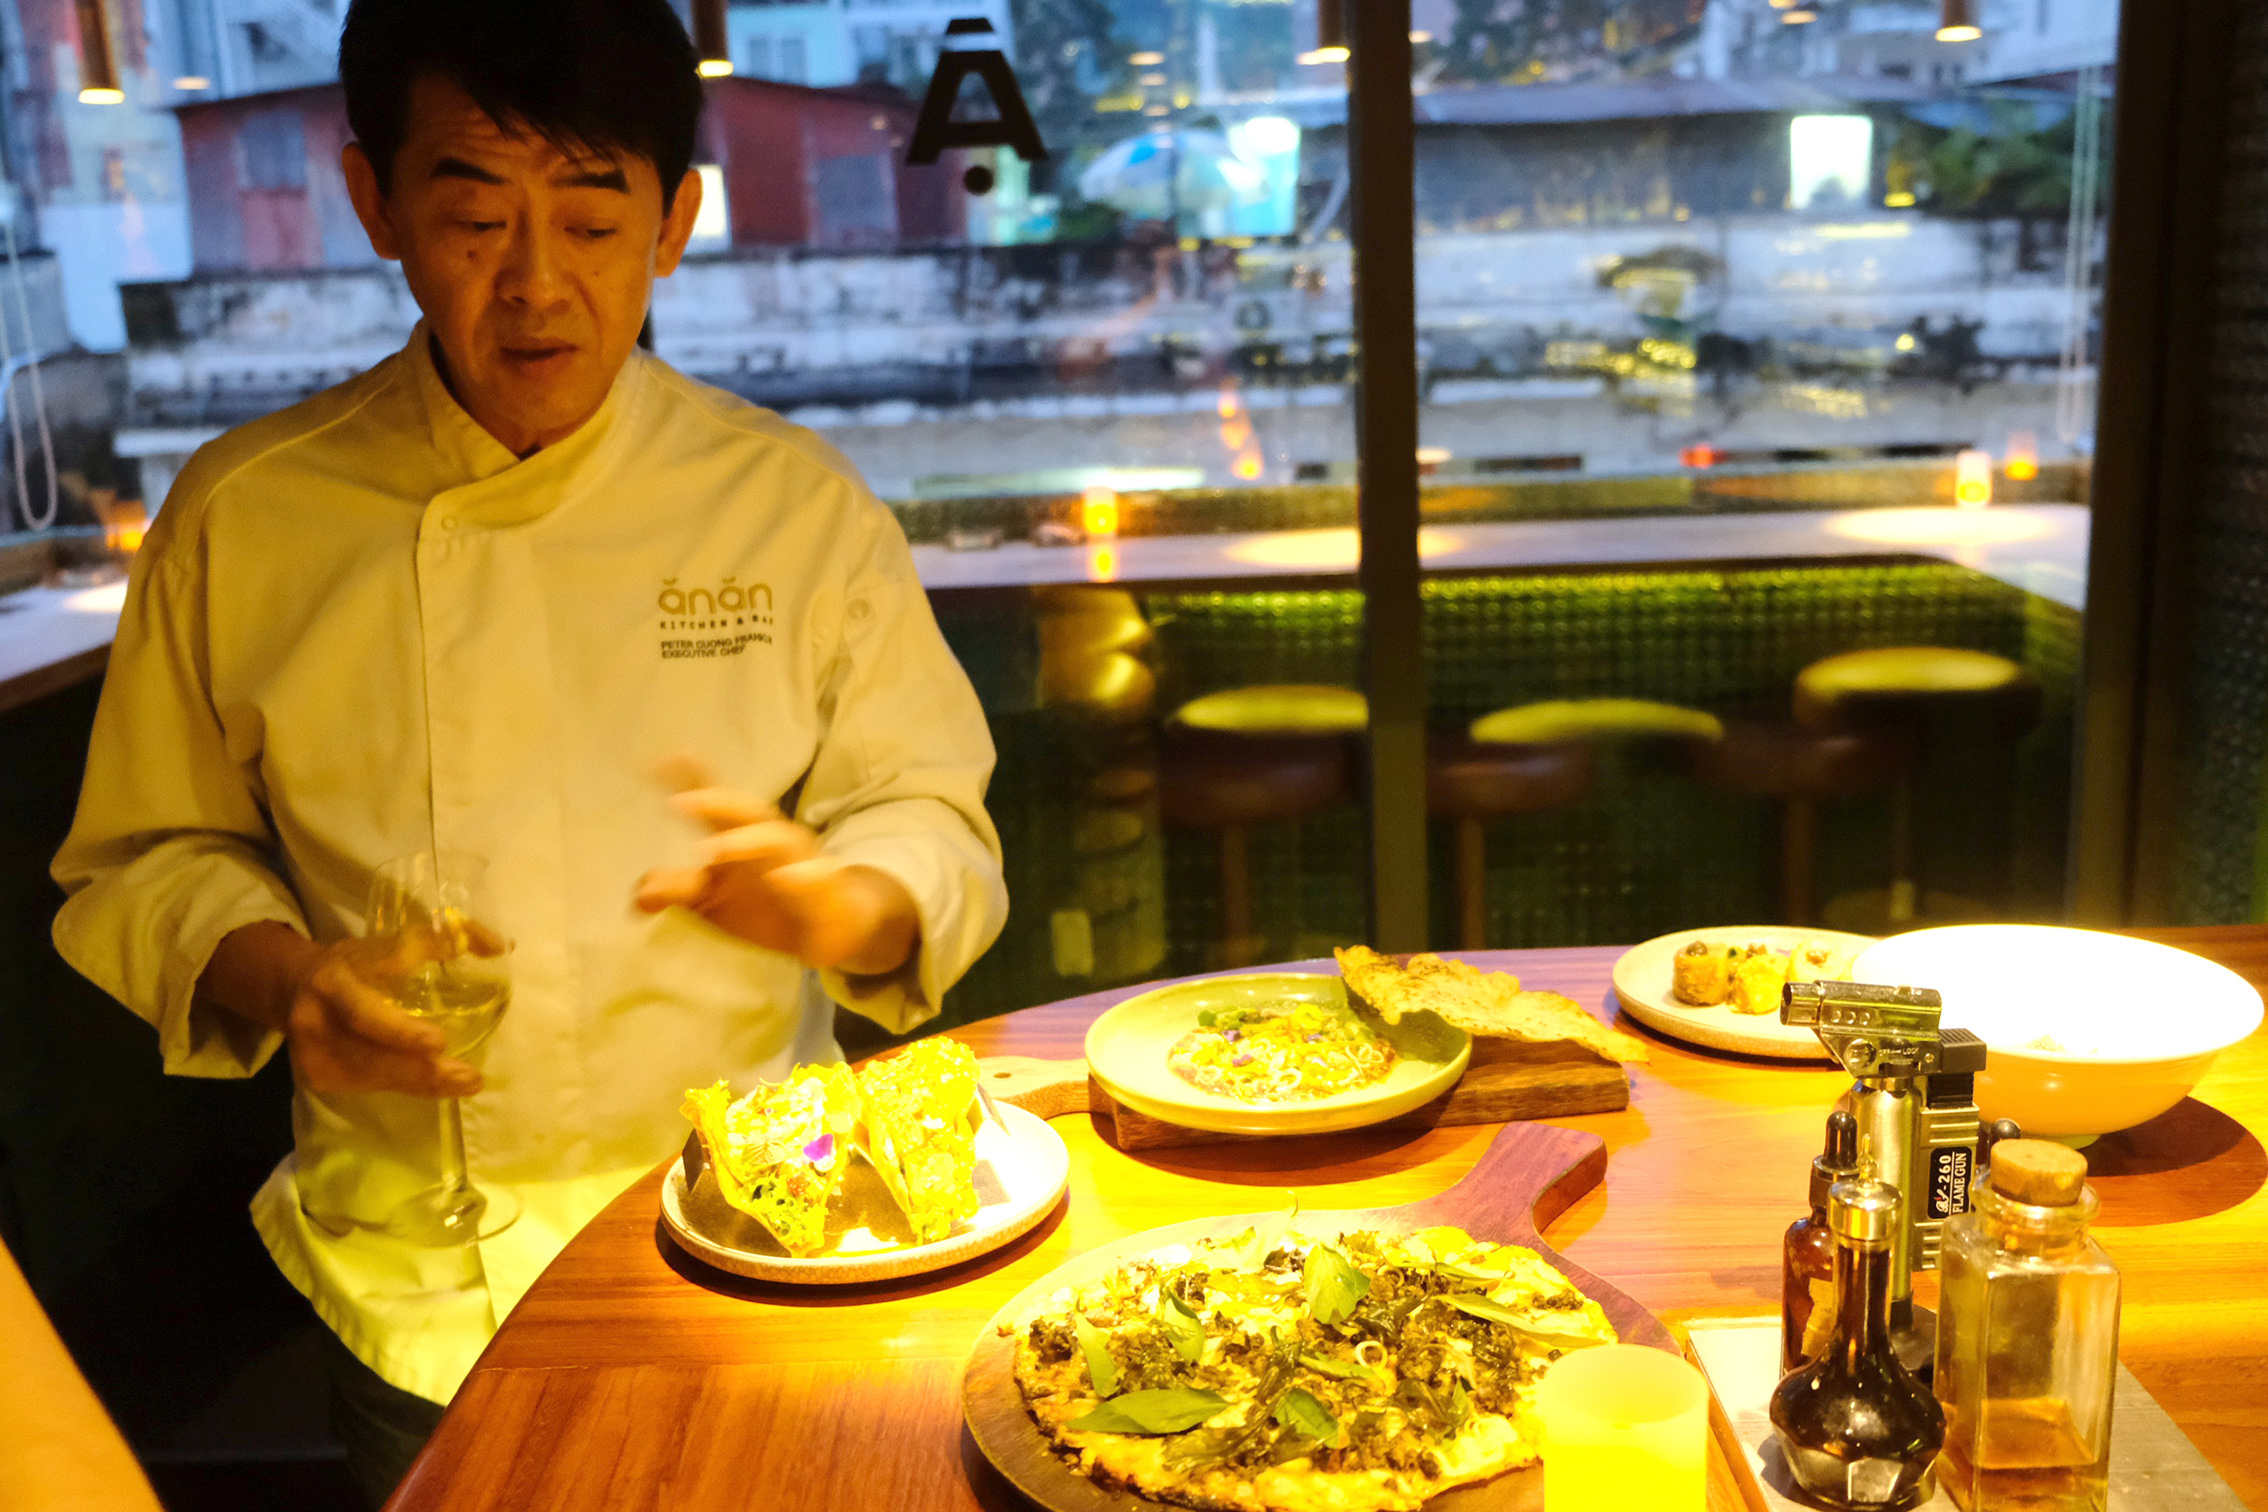 Chef Peter Cuong Franklin talks about his food creations at Anan Saigon. Photo: Gia Tien / Tuoi Tre